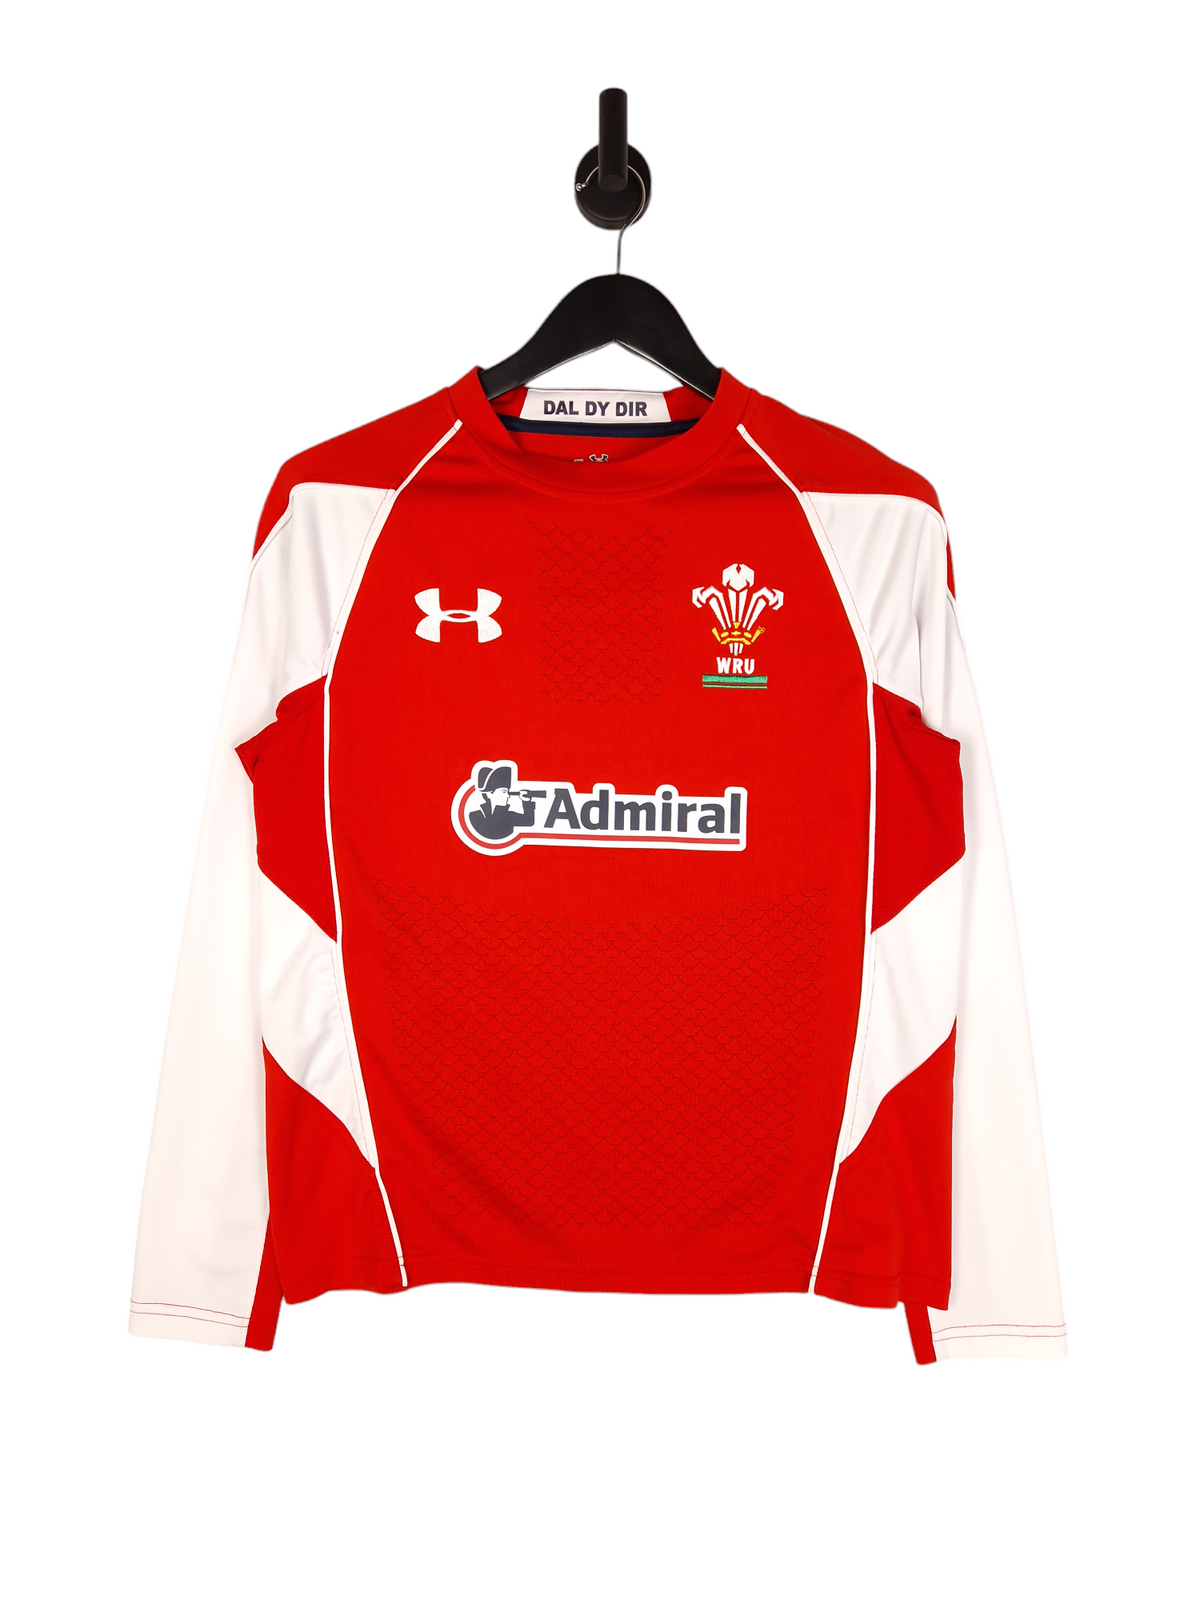 Under Armour WALES Rugby Union Jersey - Size Small